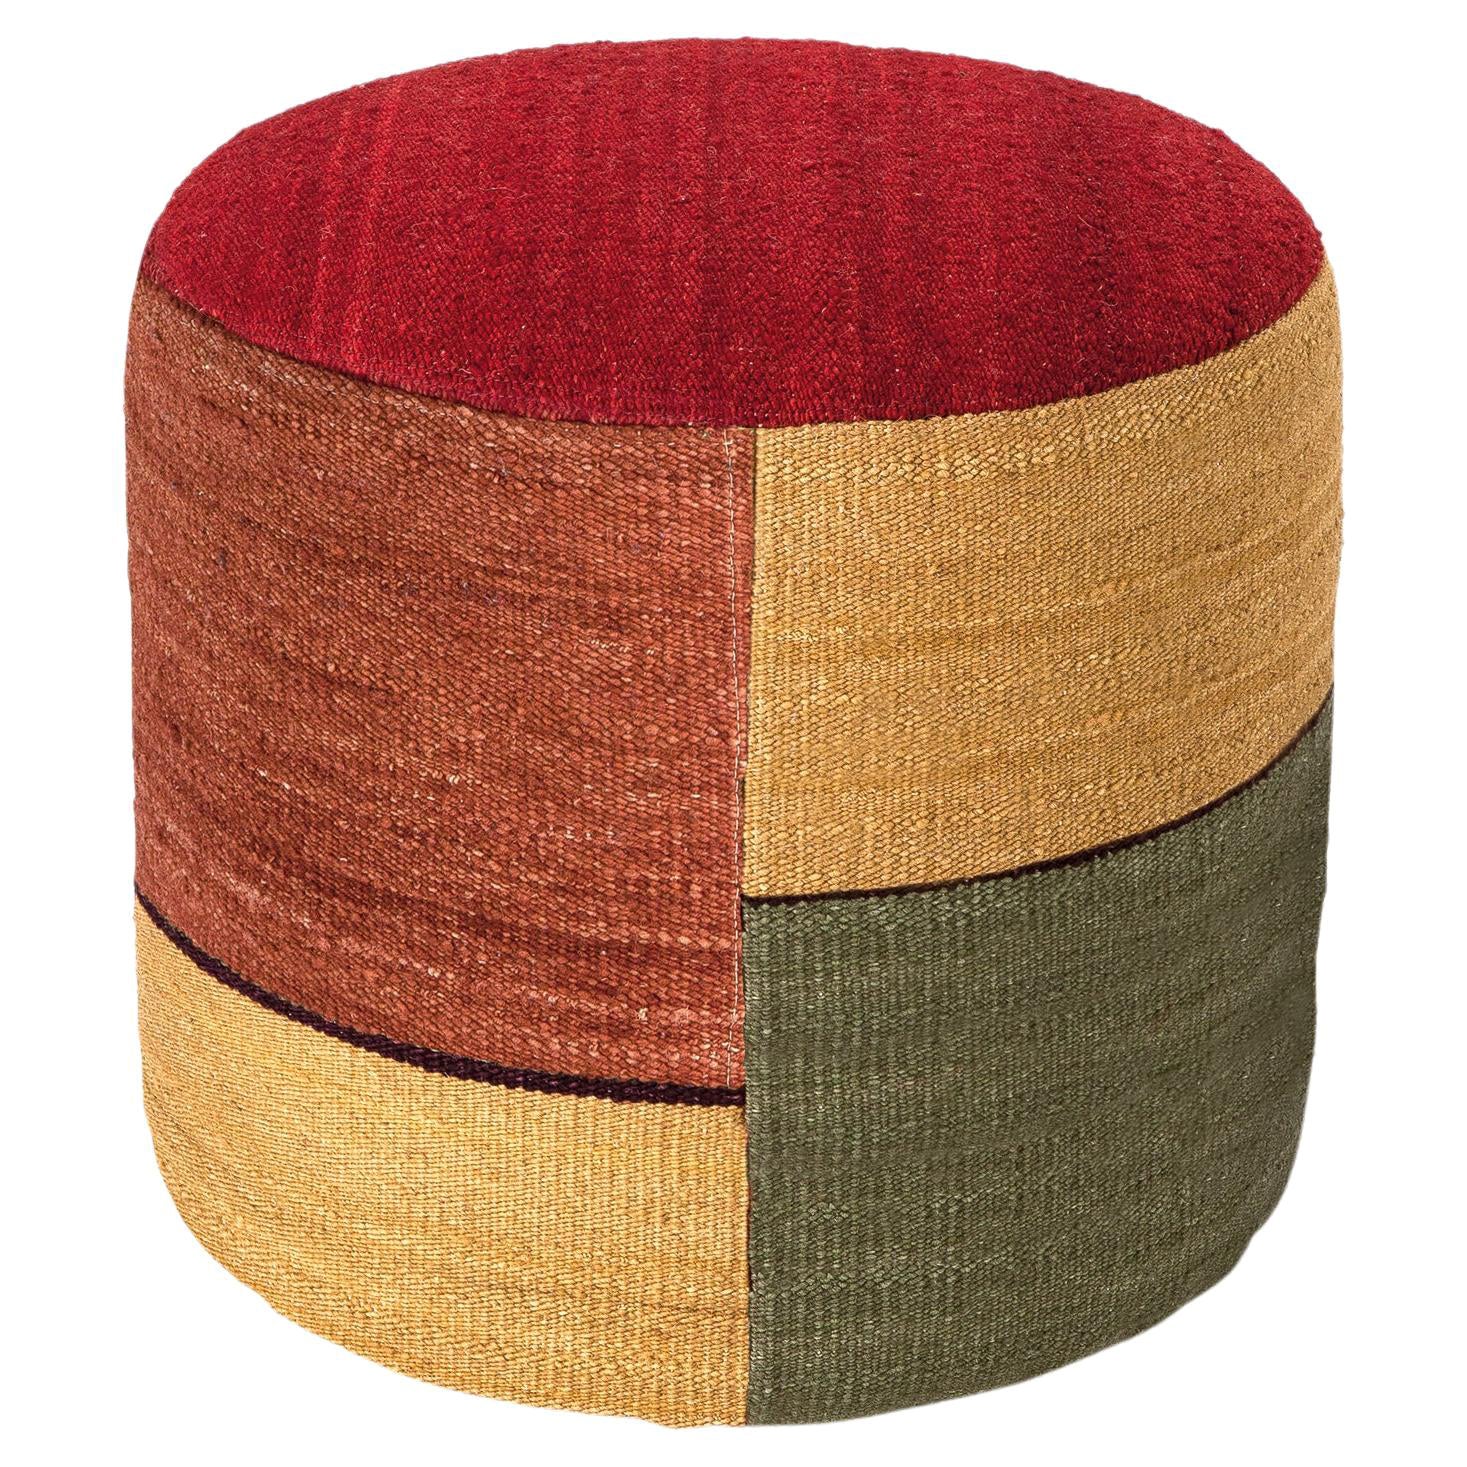 'Kilim 4' Pouf by Nani Marquina and Marcos Catalán for Nanimarquina For Sale